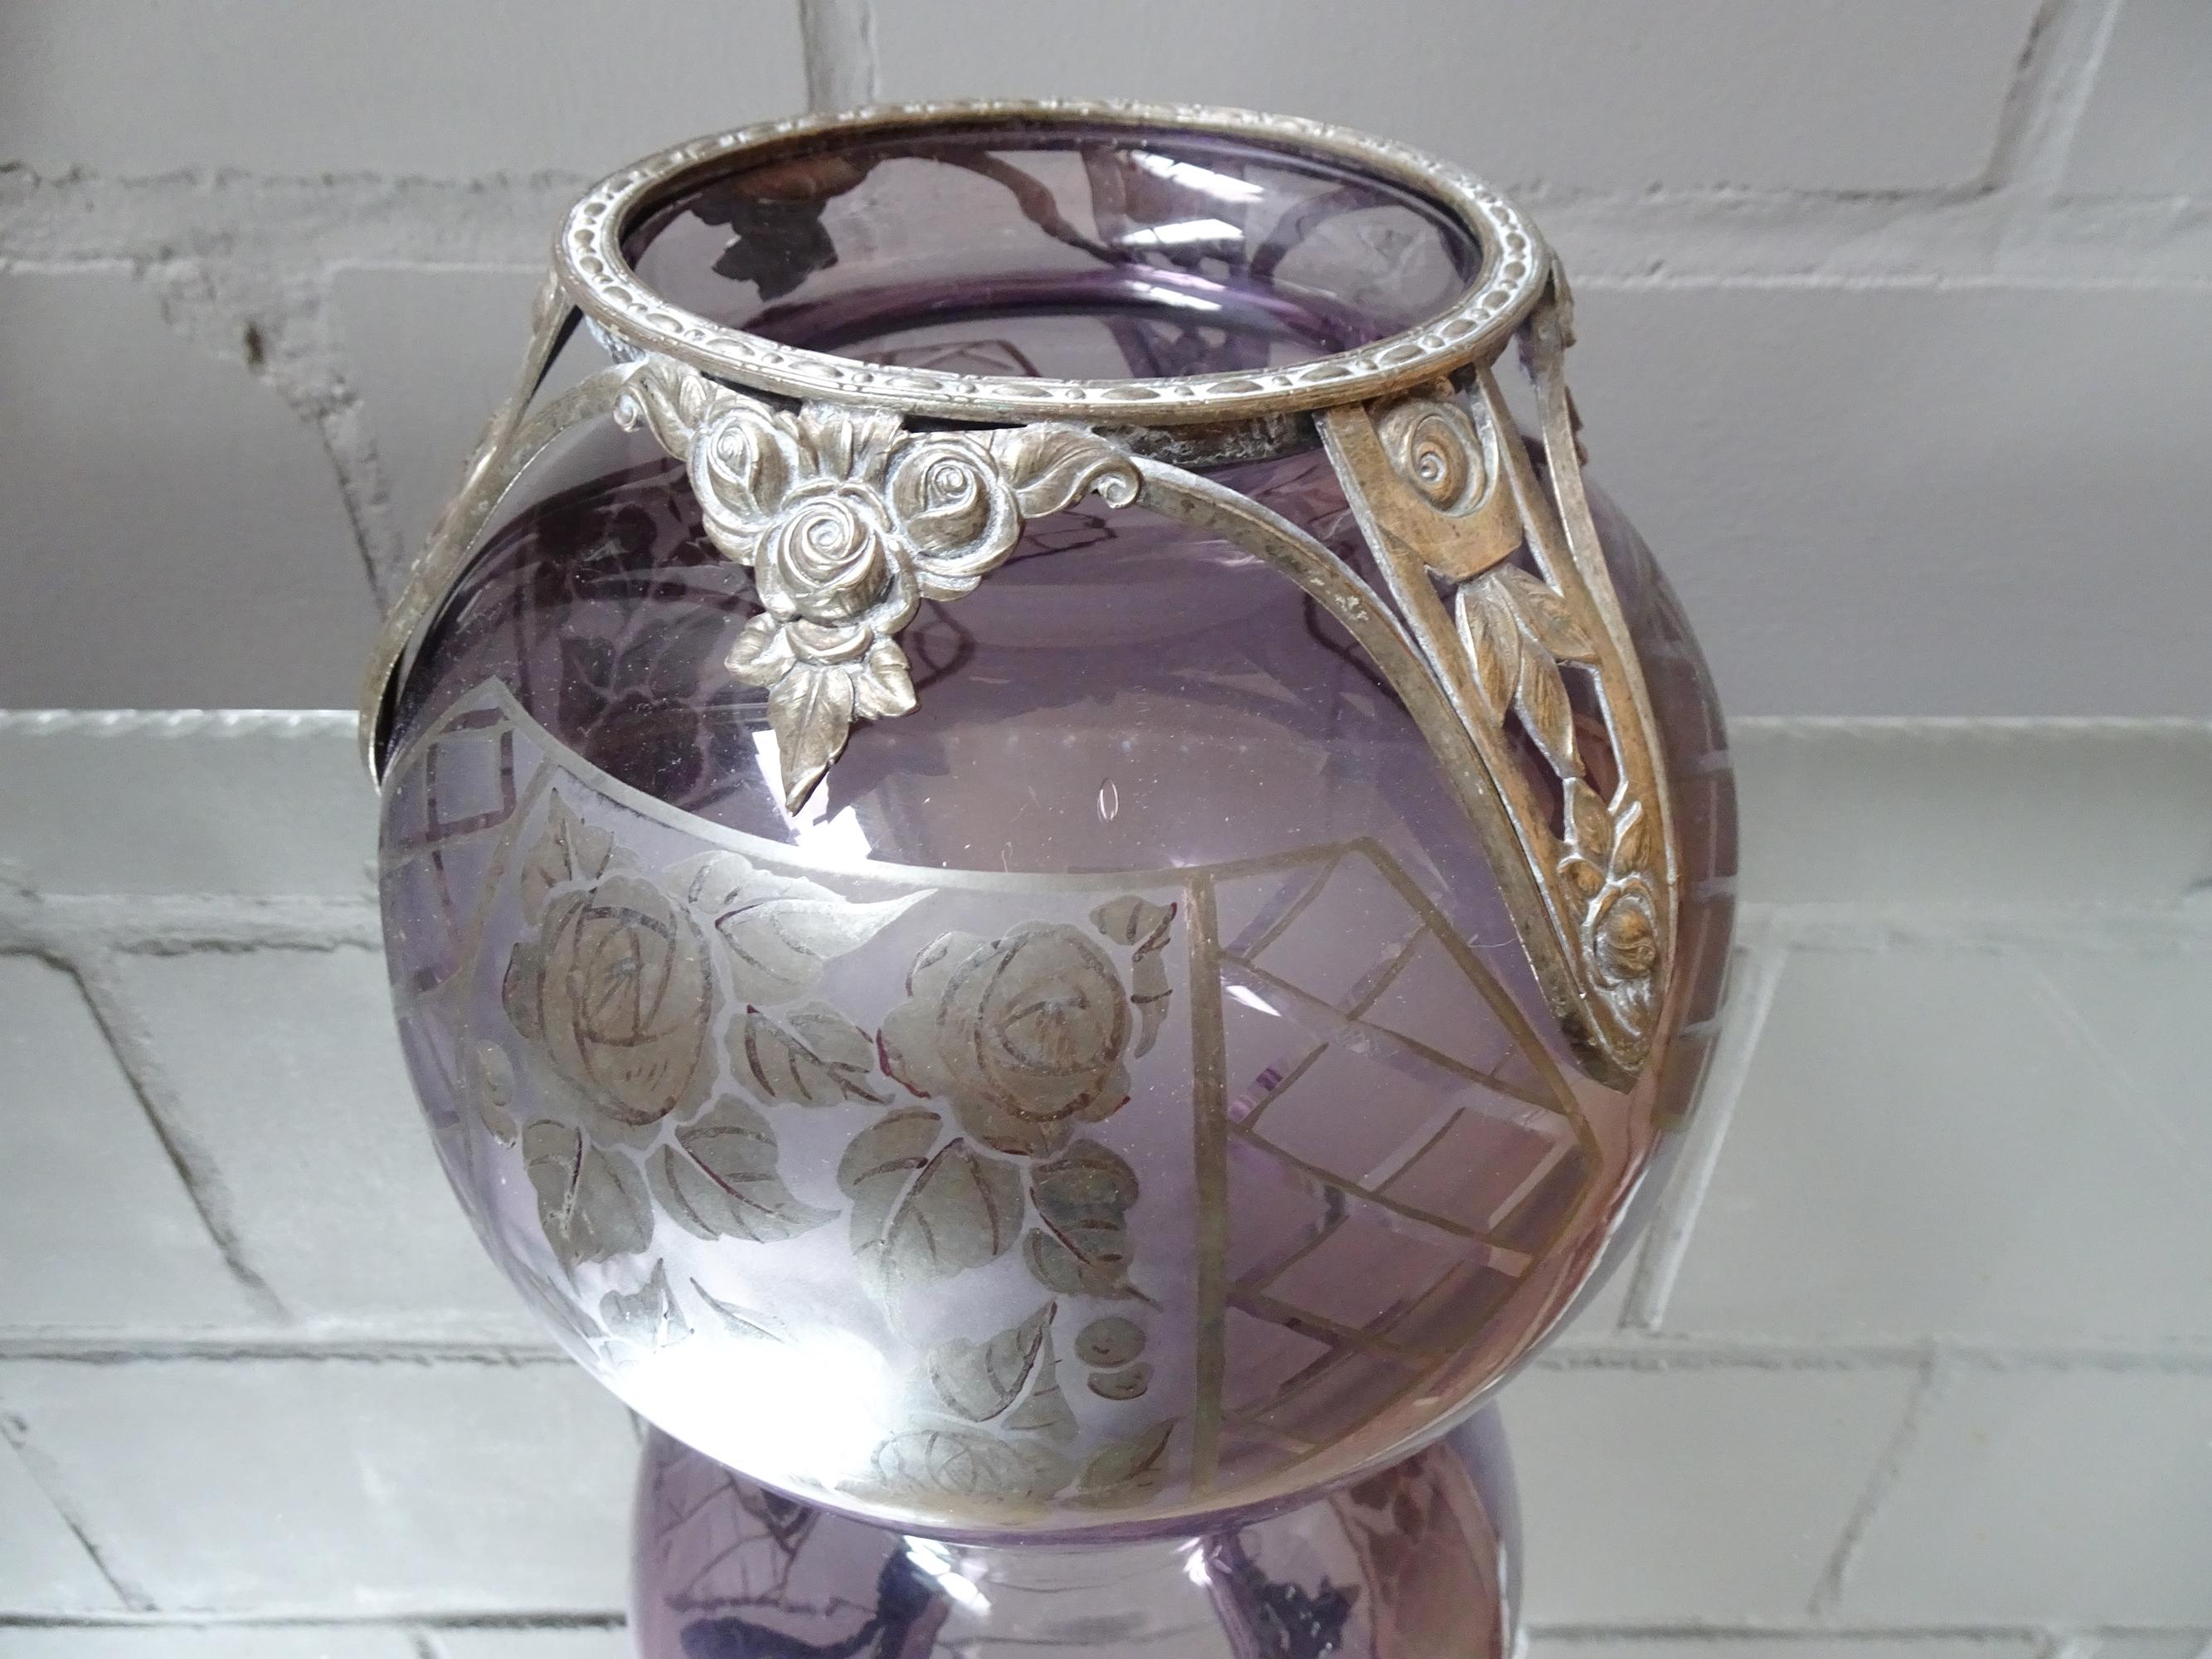 Stylish Art Deco vase by the famous glass manufacturer D'Argyl Val, E et Cie, ancient maison Effler from 1928. Amethyst colored glass with silver plated details in rose petals with a slightly graphic pattern. The removable metal ring is also